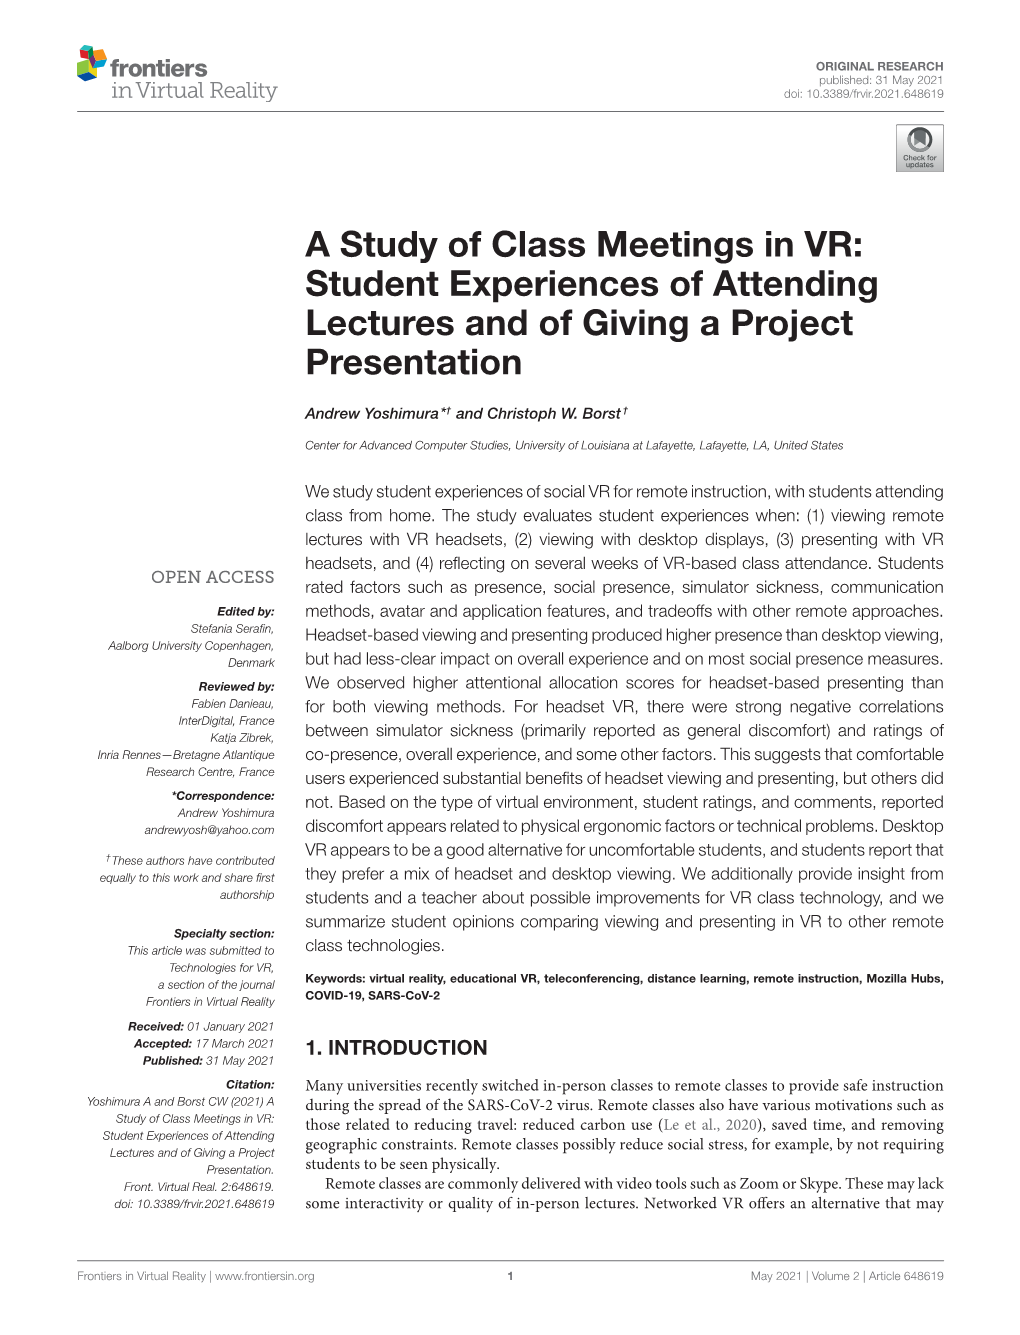 Downloading of Content), Virtual Room Preference, External Distractions Were Found Problematic When Present